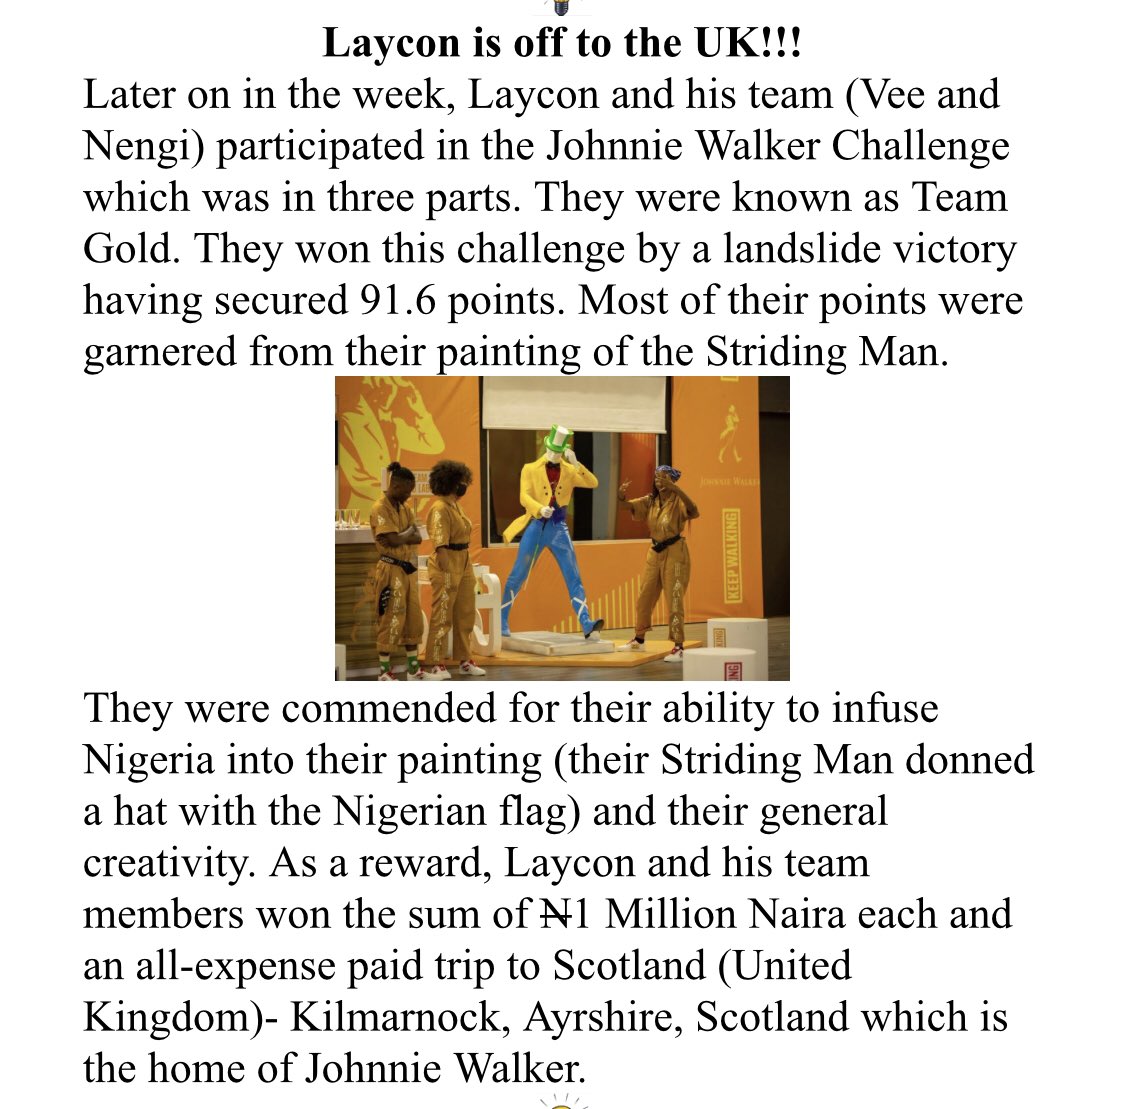 They were commended for their ability to infuse Nigeria into their painting (their Striding Man donned a hat with the Nigerian flag) and their general creativity. As a reward,Laycon and his team members won the sum of N1 Million Naira each and an all-expense paid trip to Scotland